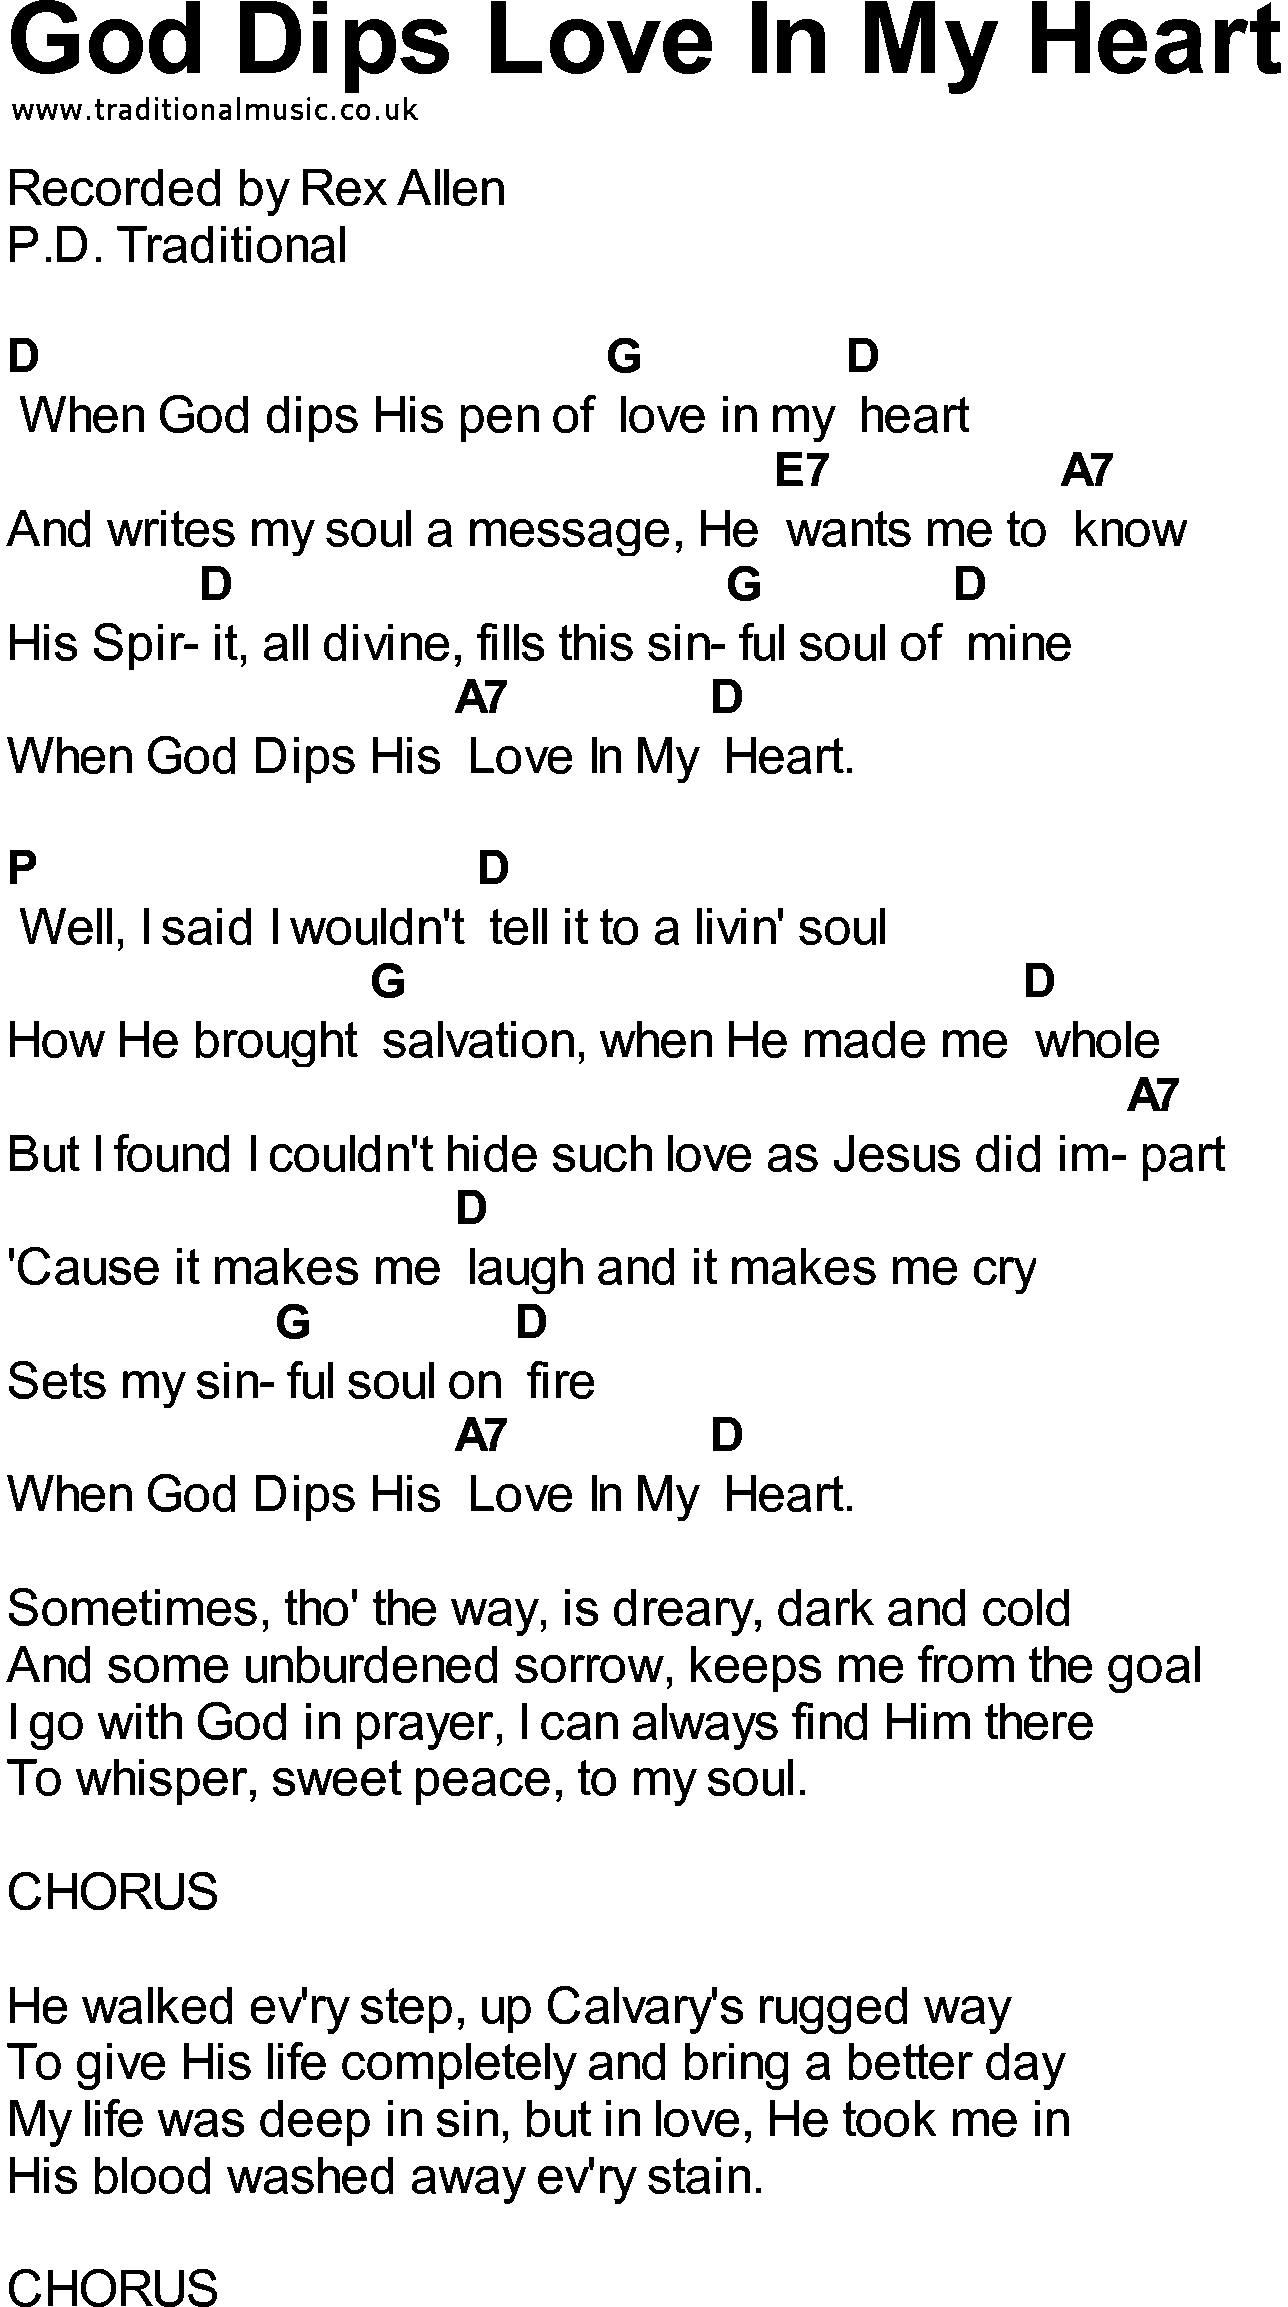 Bluegrass songs with chords - God Dips Love In My Heart